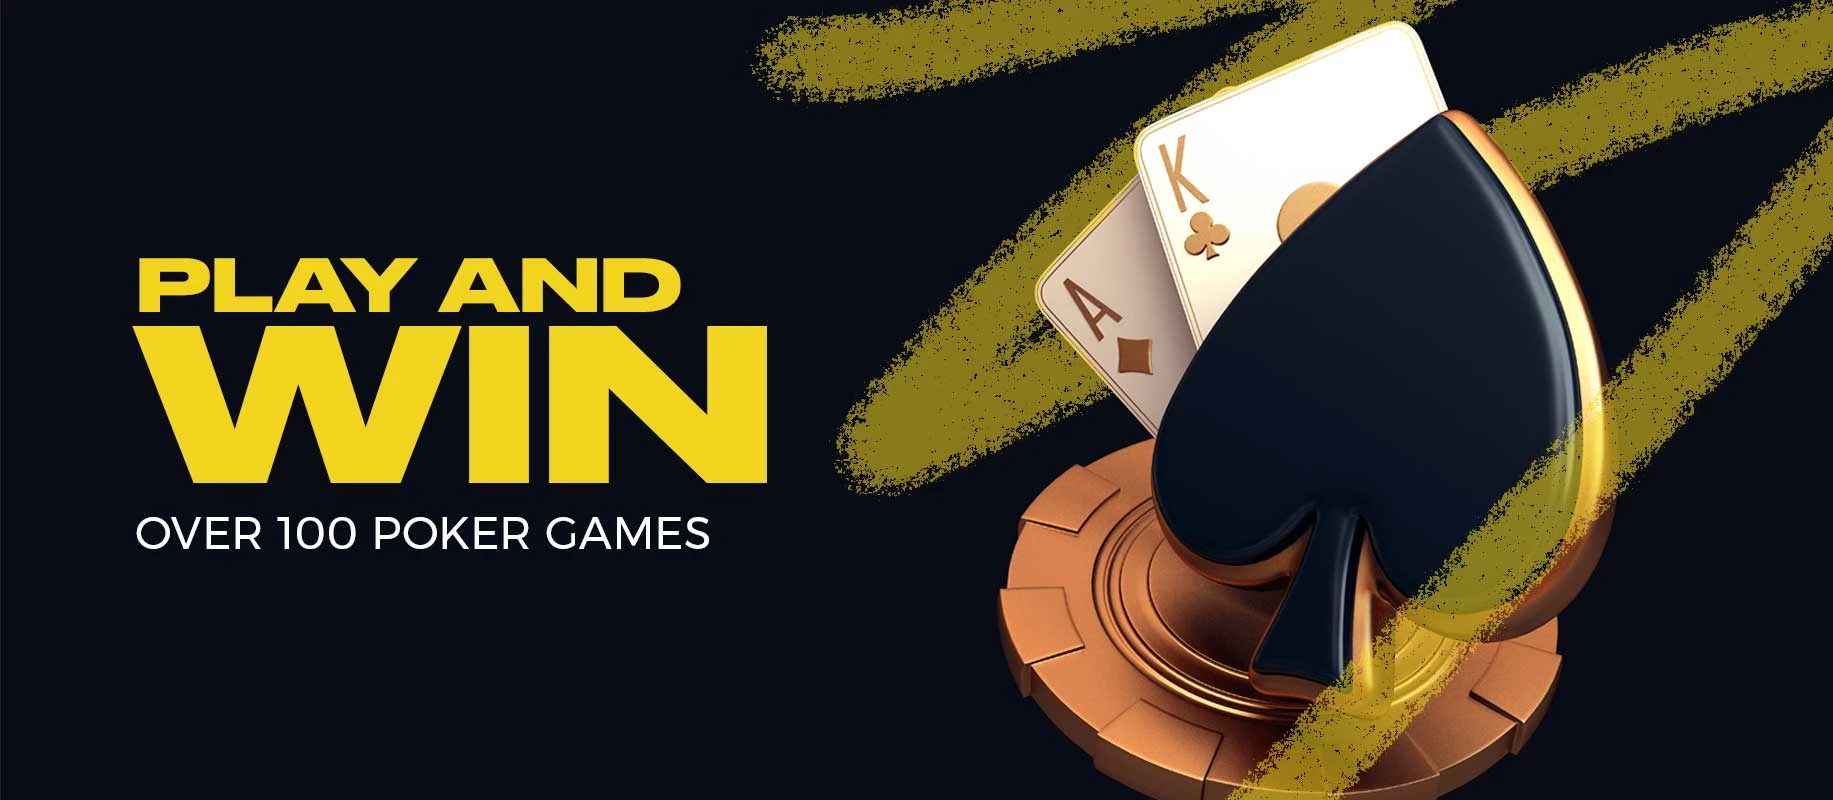 Play and Win - 100 Games